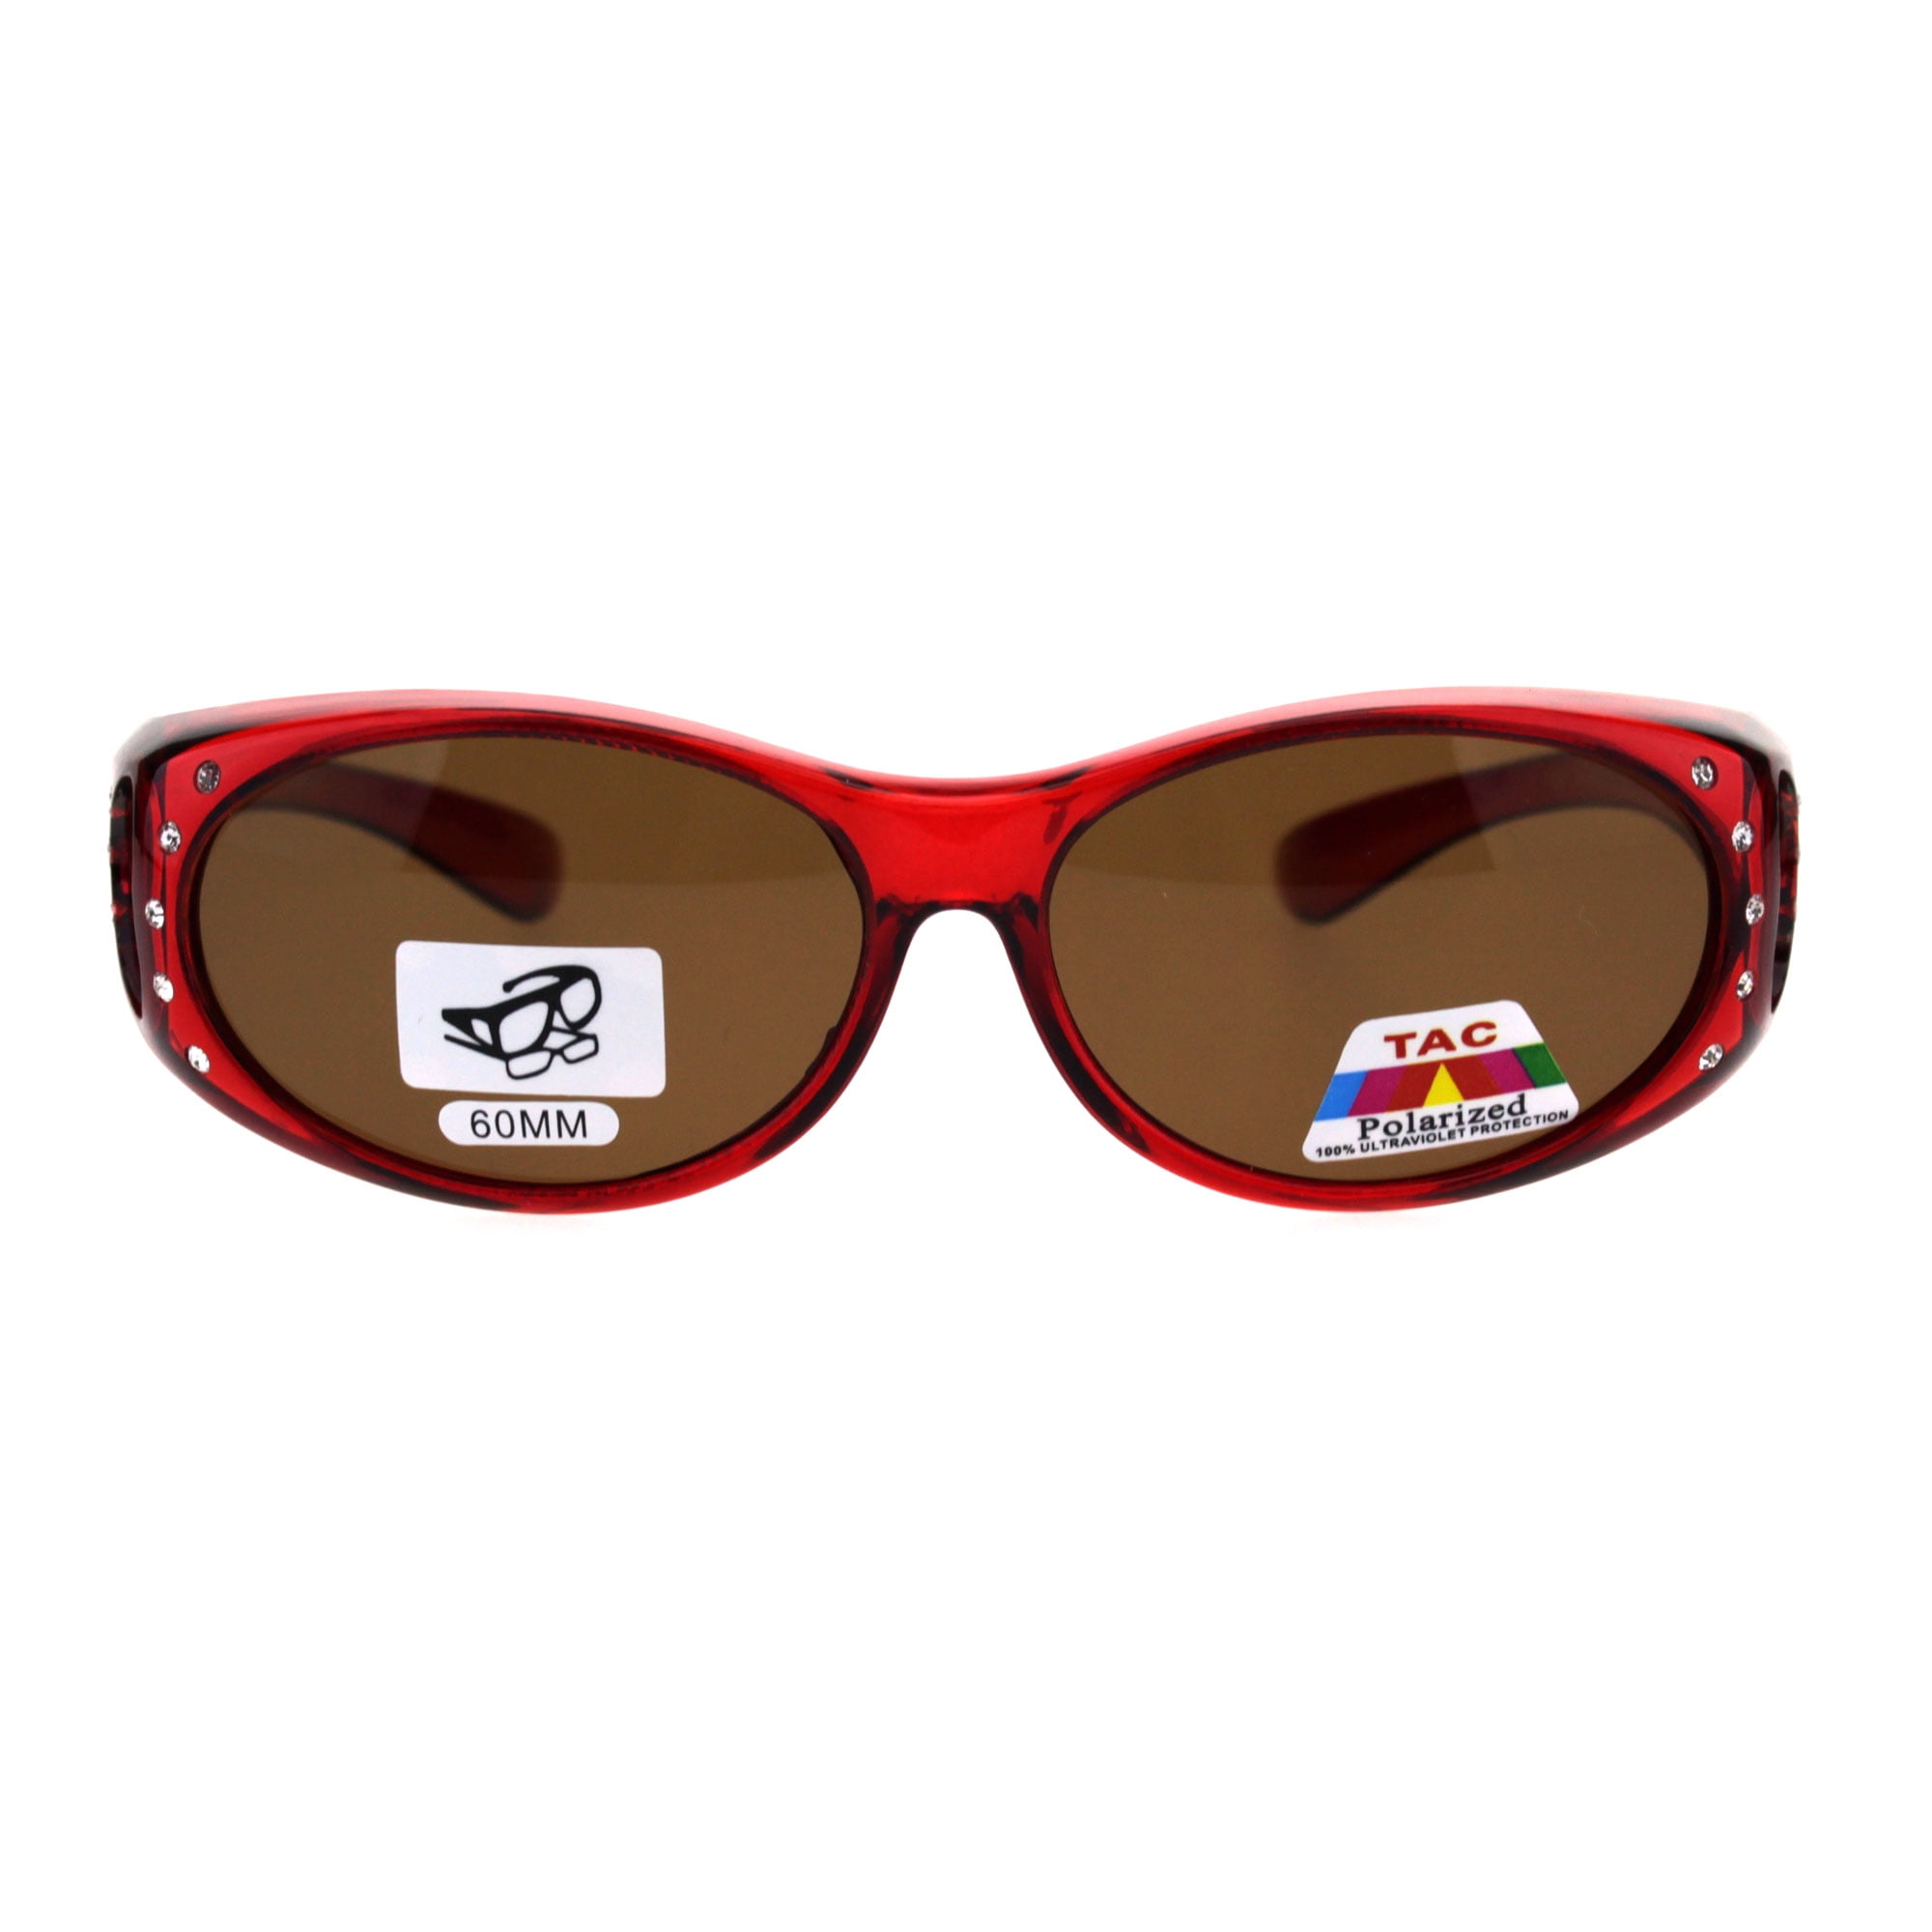 Sa106 Rhinestone Polarized Womens 60mm Over The Glasses Fit Over Sunglasses Red Brown